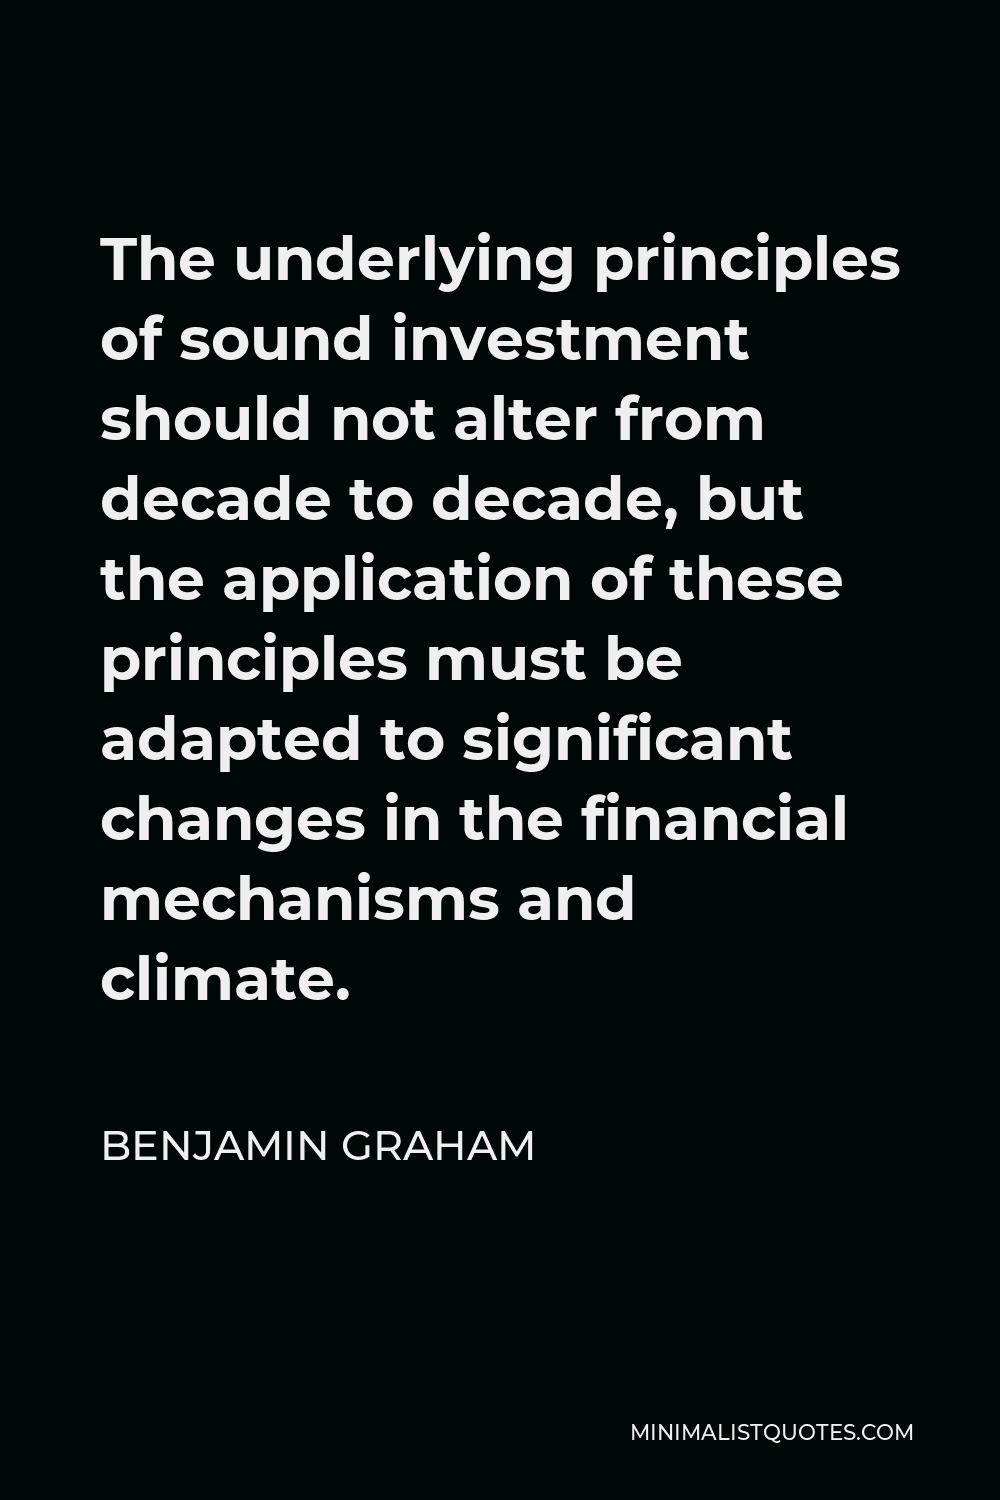 Benjamin Graham Quote - The underlying principles of sound investment should not alter from decade to decade, but the application of these principles must be adapted to significant changes in the financial mechanisms and climate.